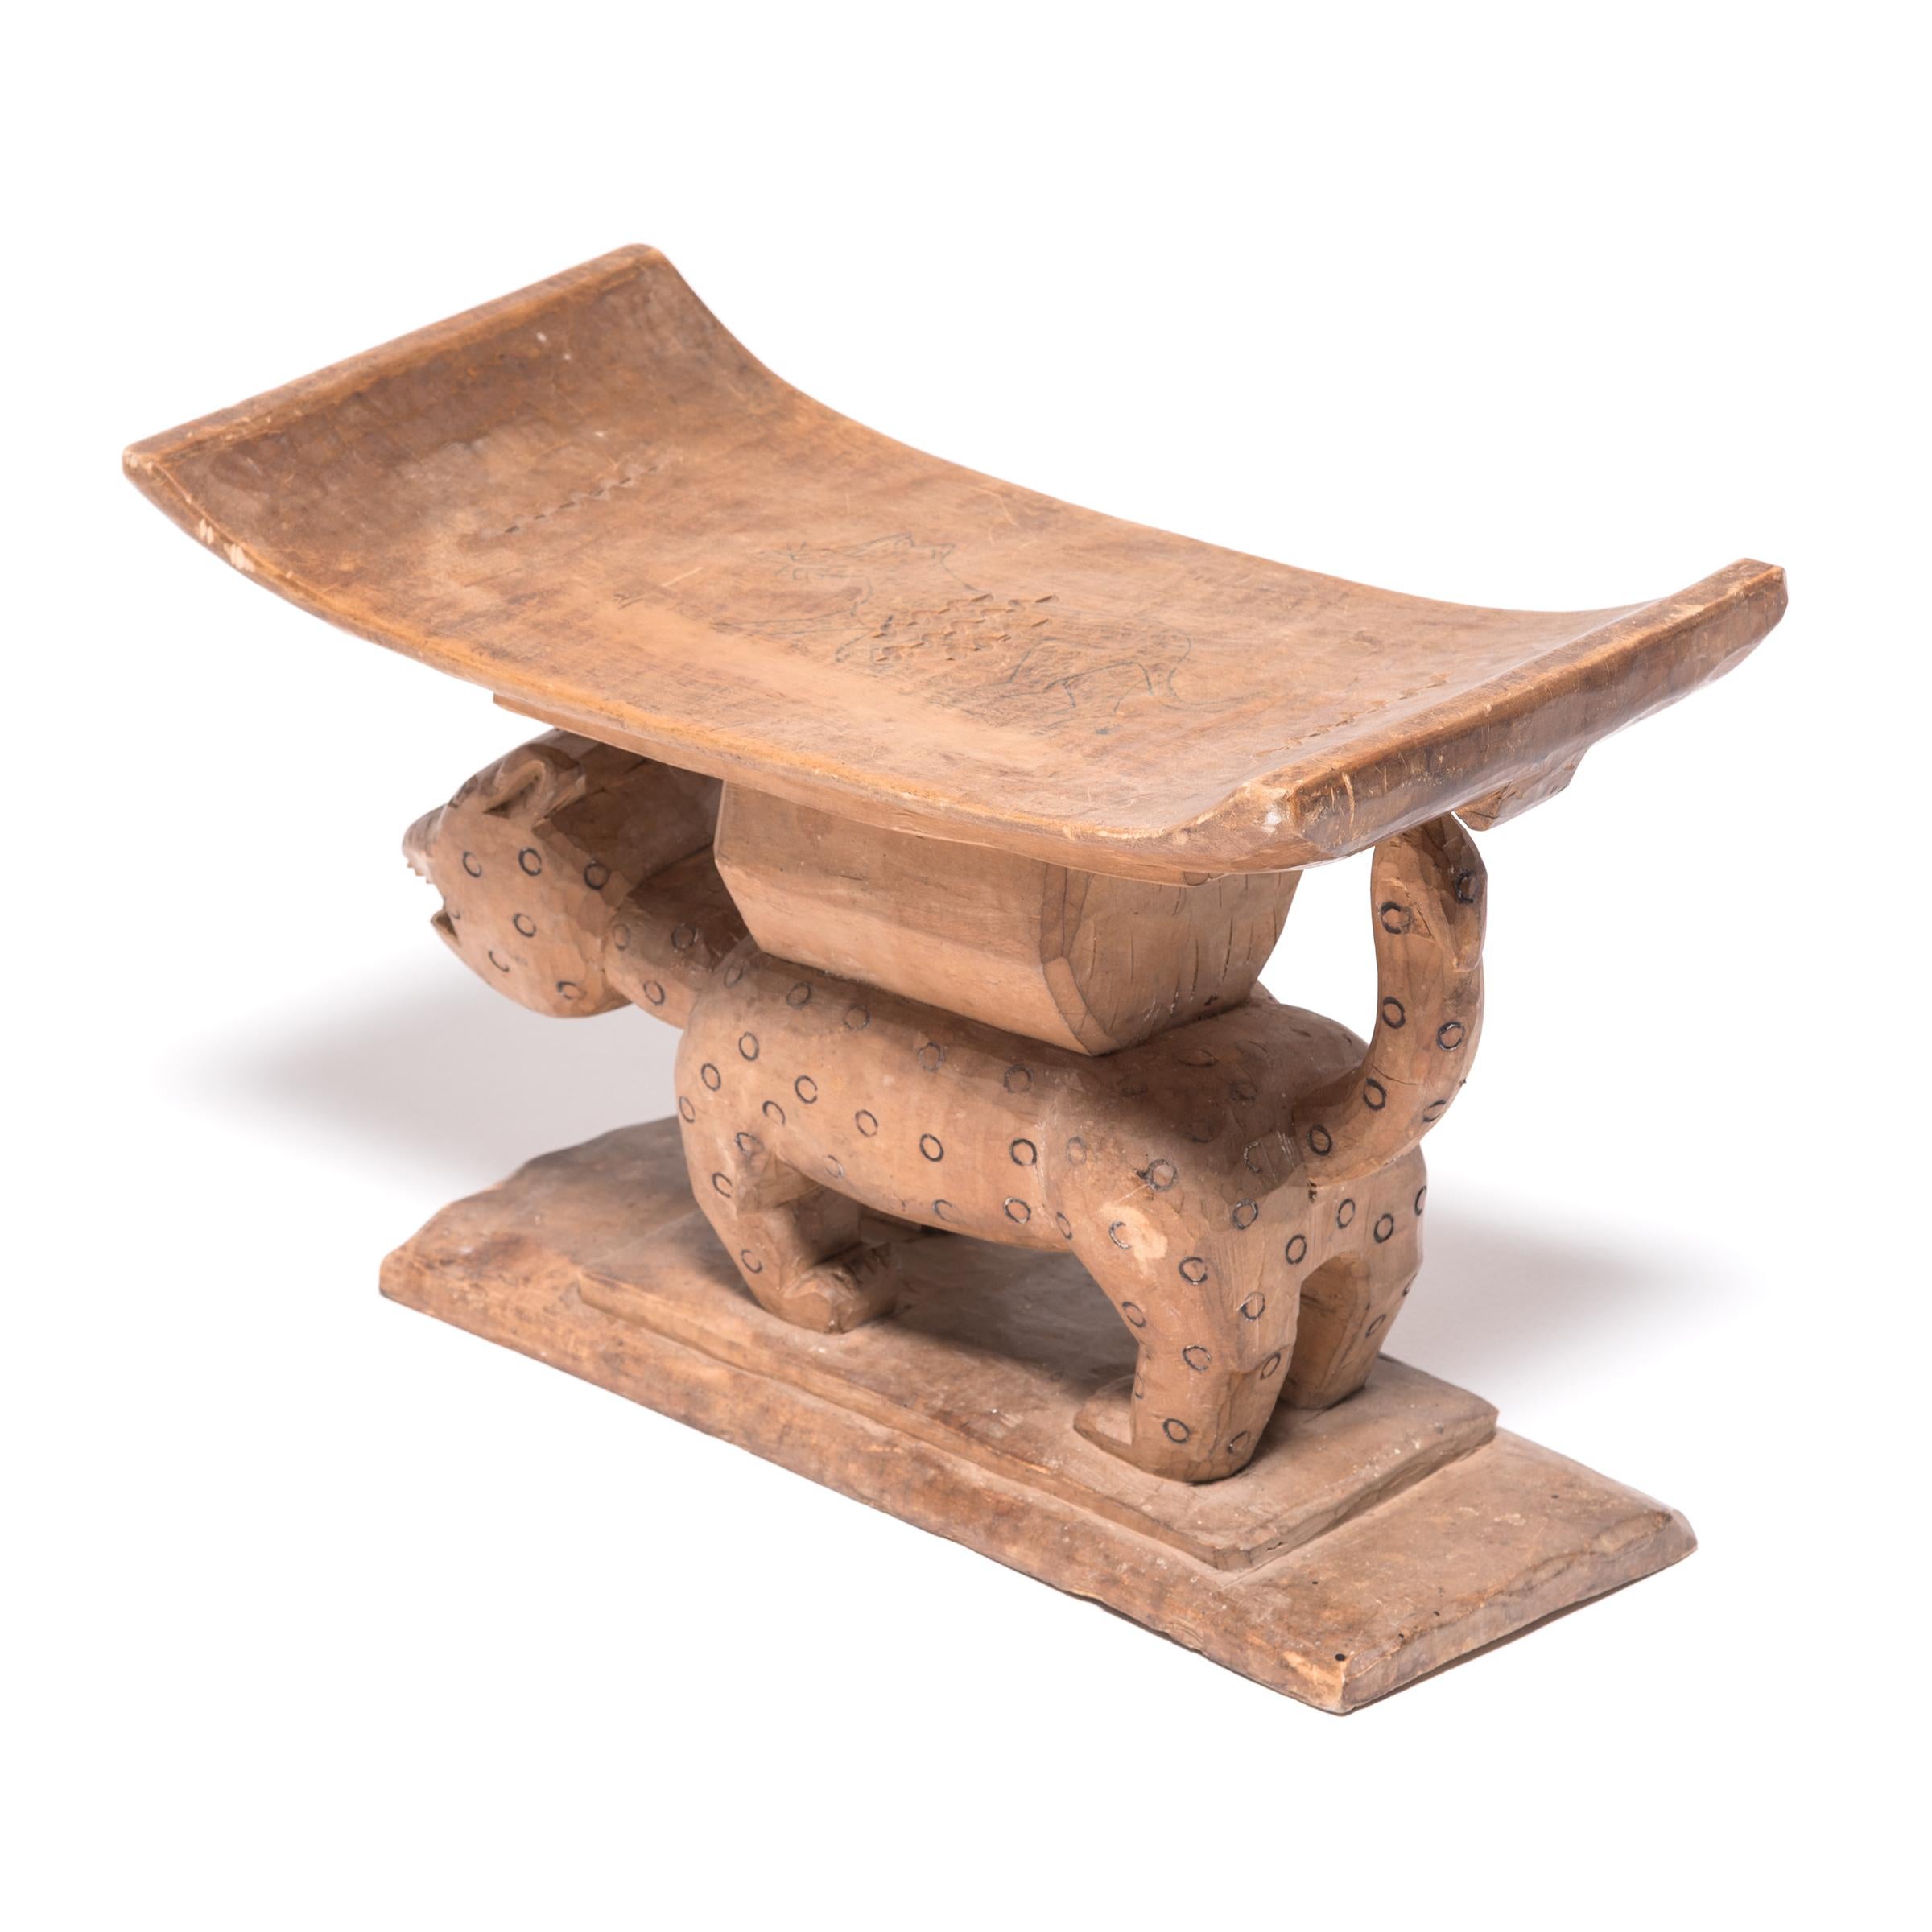 Stools indicated power, status, and lines of succession in traditional Ashanti culture. The platform base, curved seat, and ridged supports reference this as an Ashanti King stool. In Ashanti culture, leopards were symbols of fierce power. King